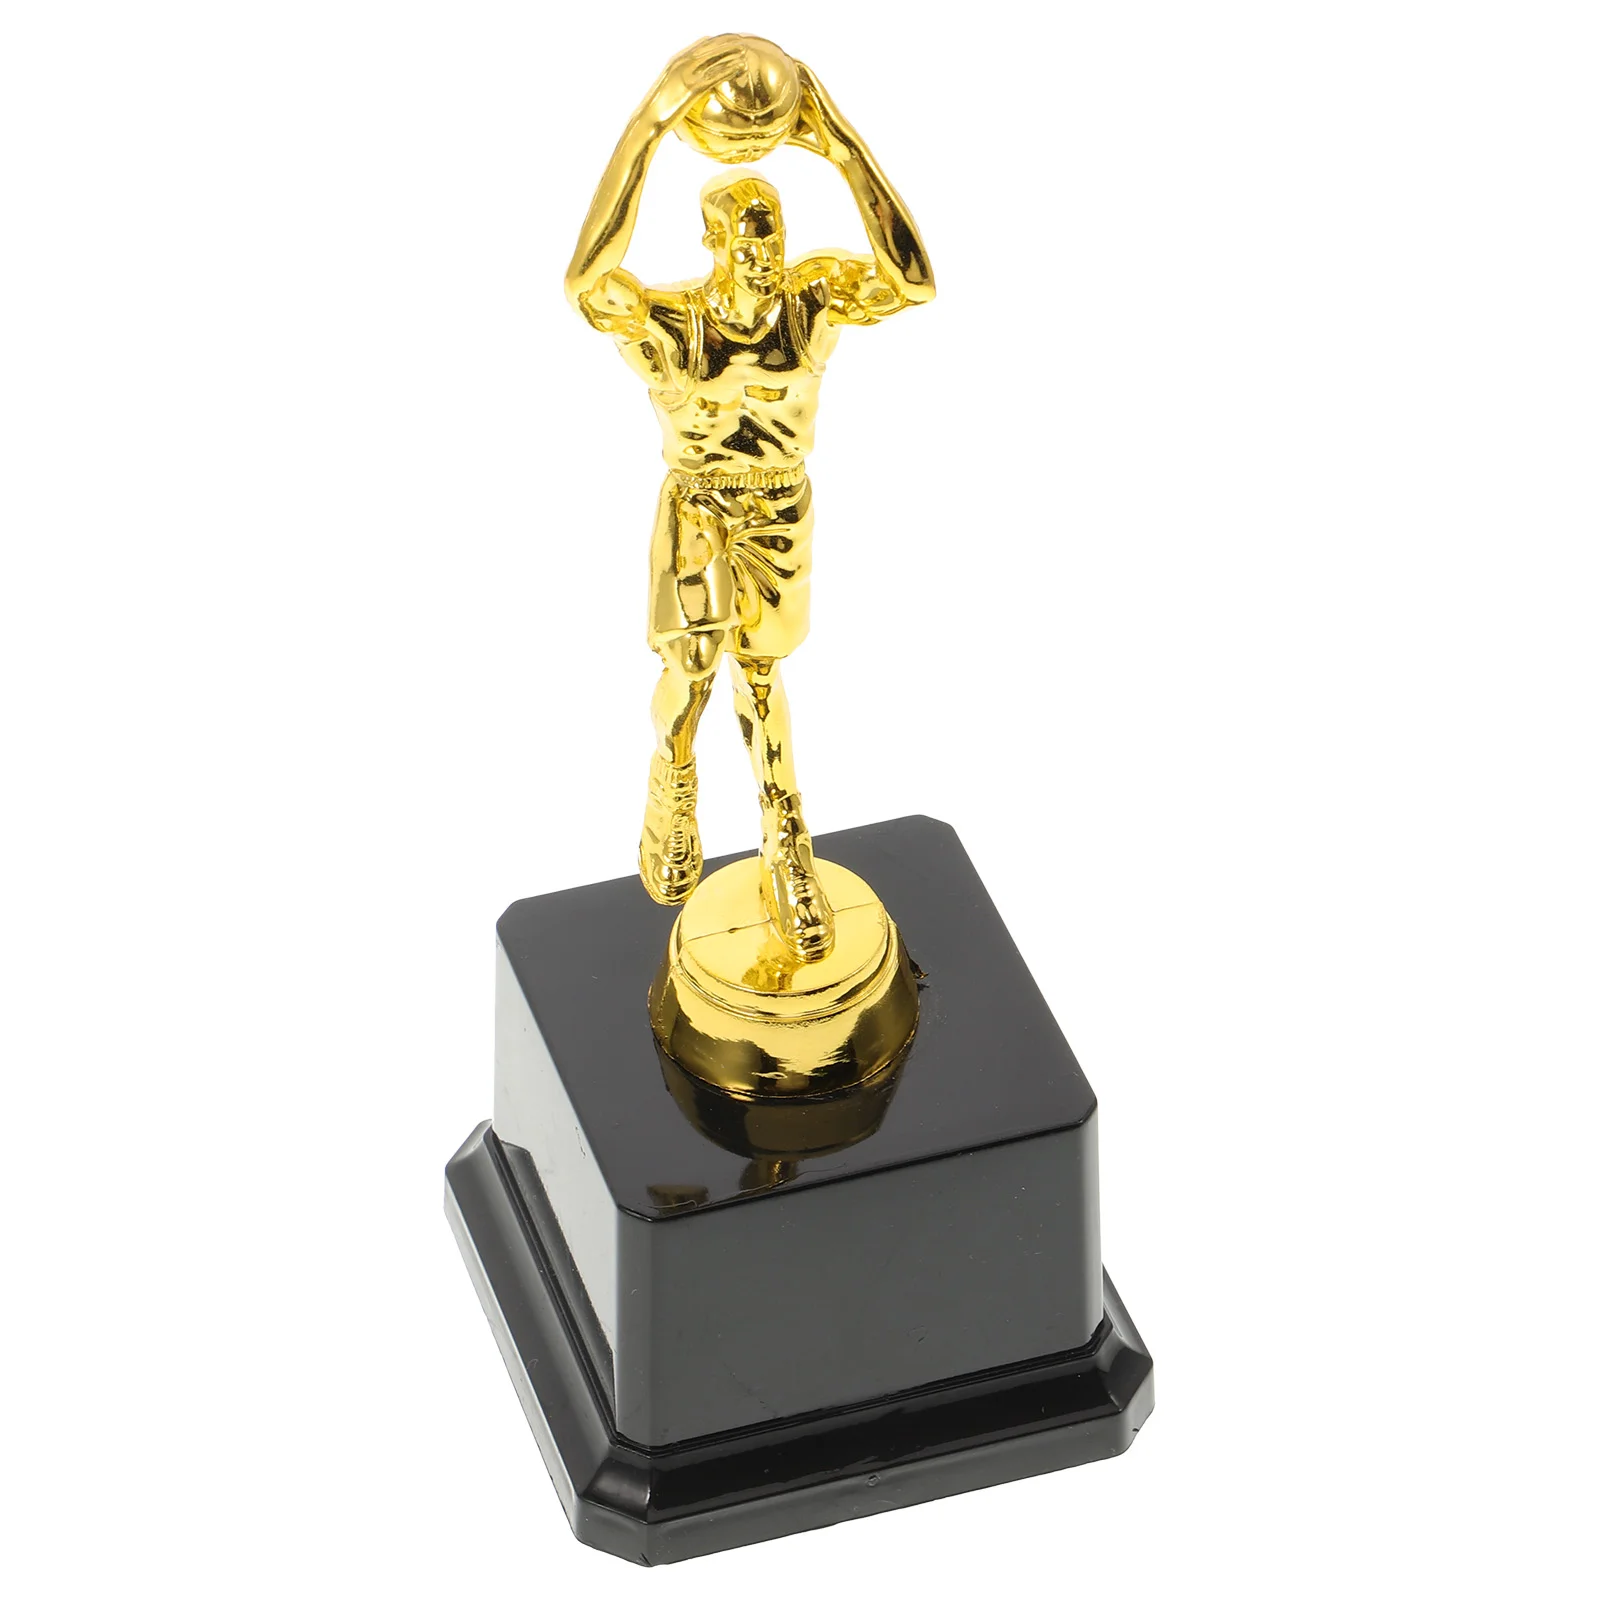 

Basketball Trophies Plastic Basketball Figure Trophy Prime for Tournaments Competitions (Golden)